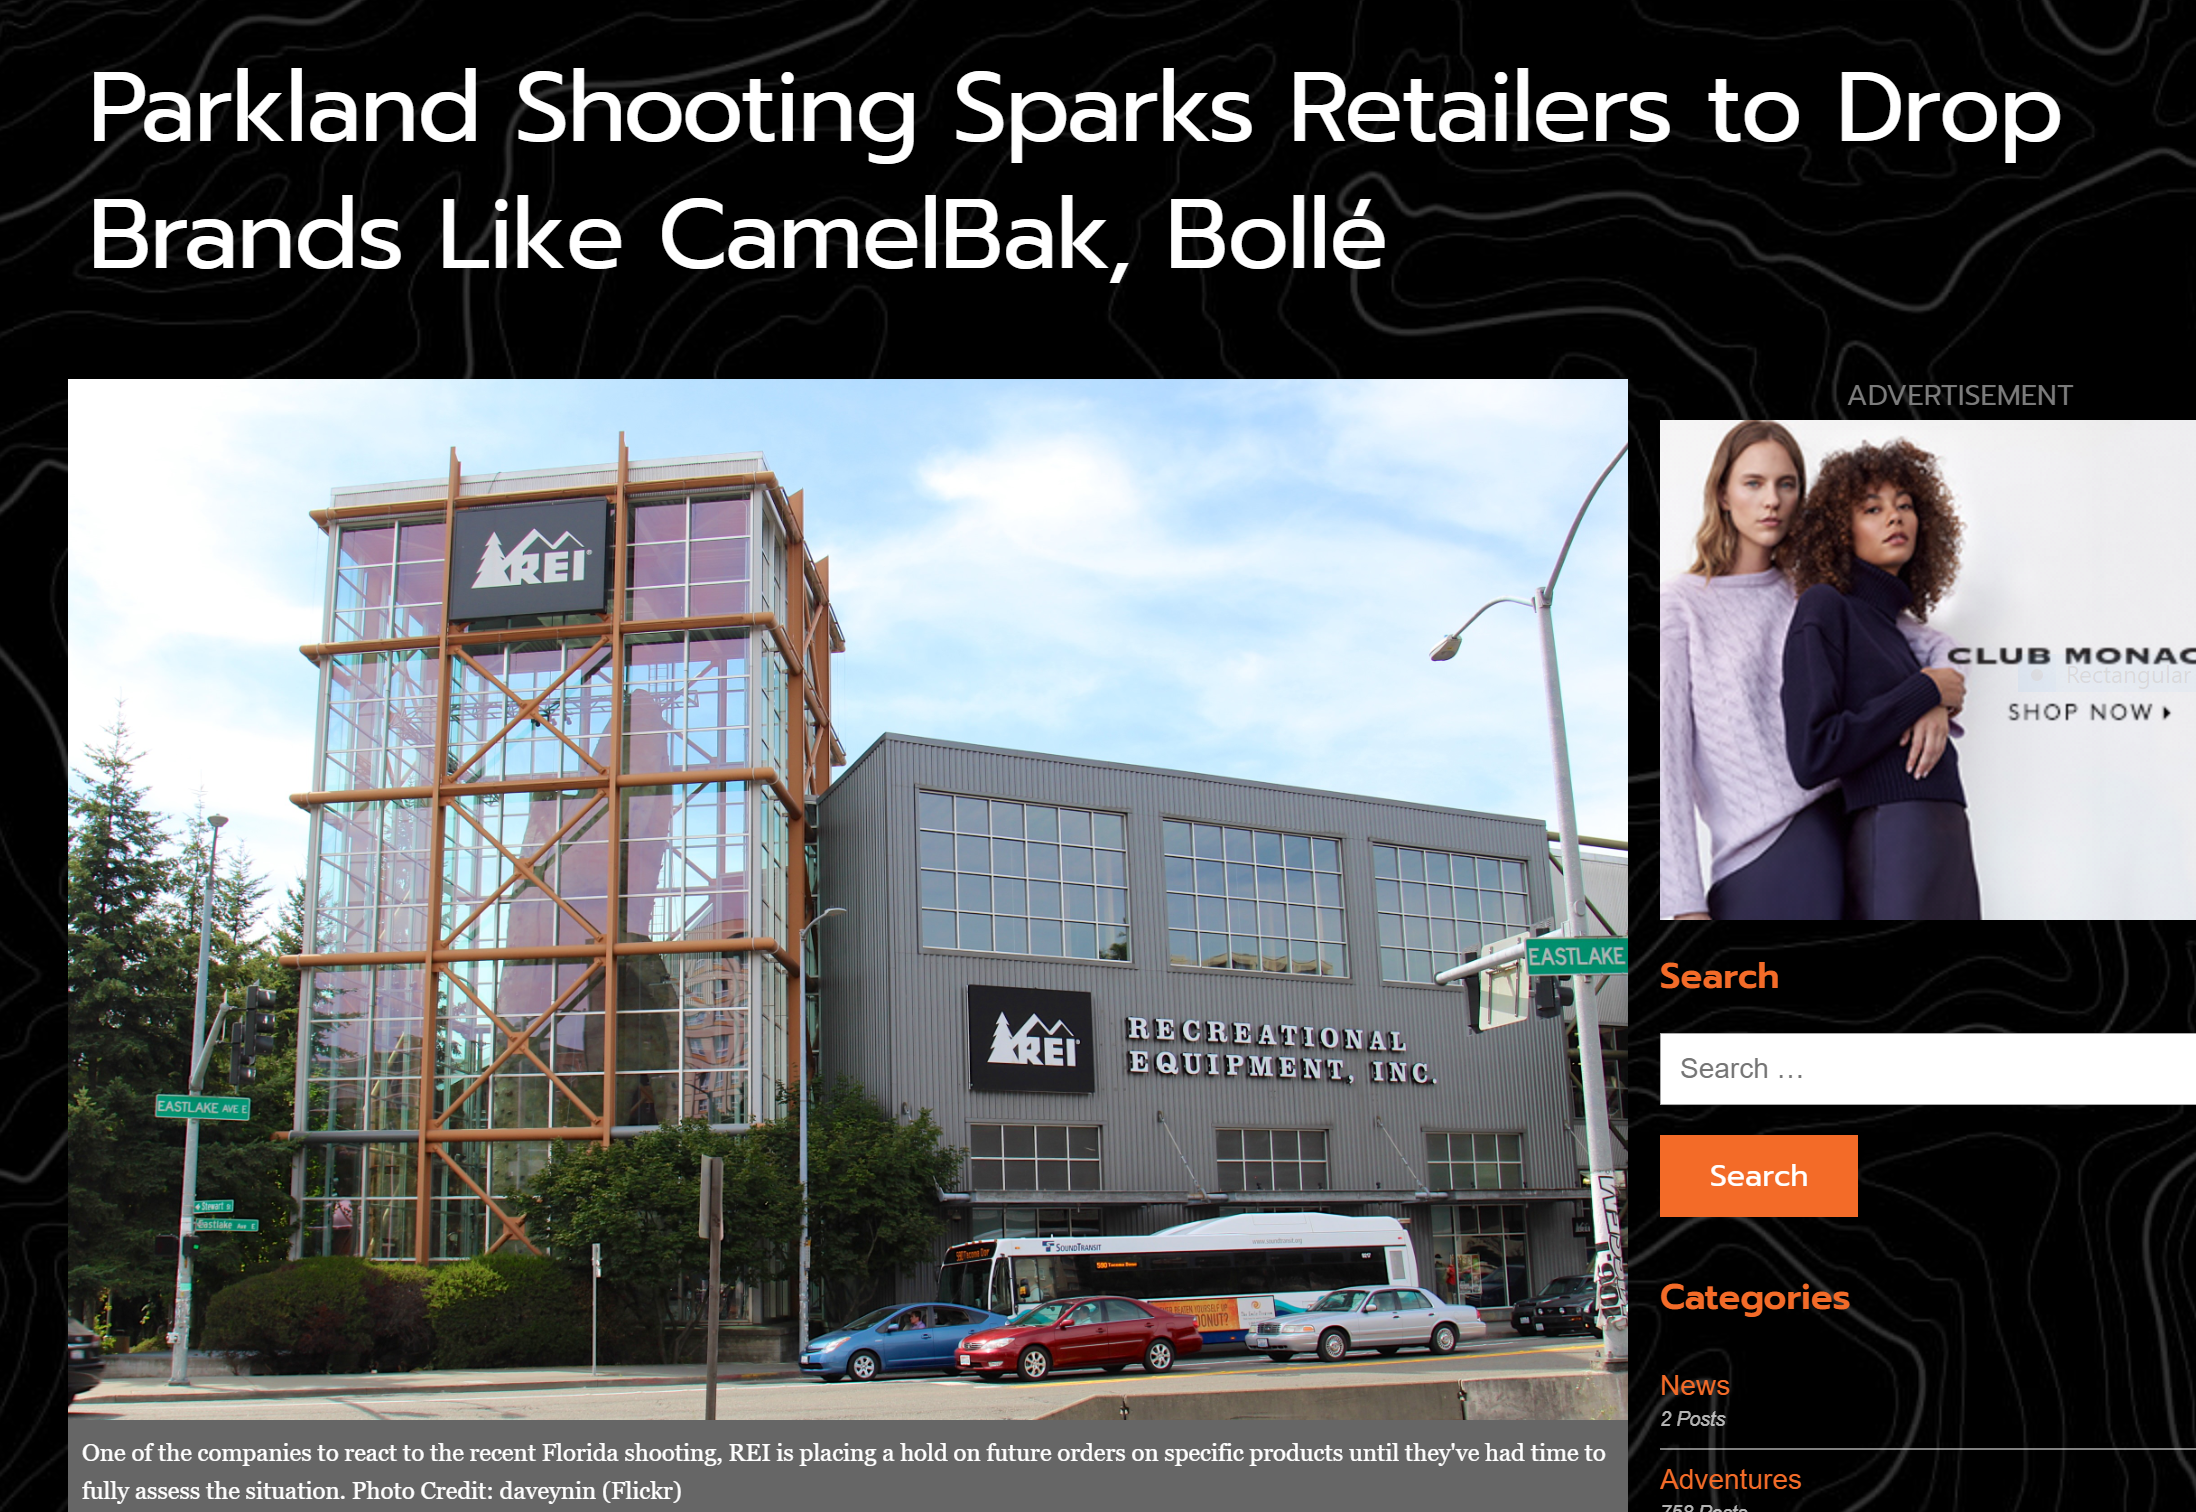 OutThere Colorado, "Parkland Shooting Sparks Retailers to Drop Brands Like CamelBak, Bolle"